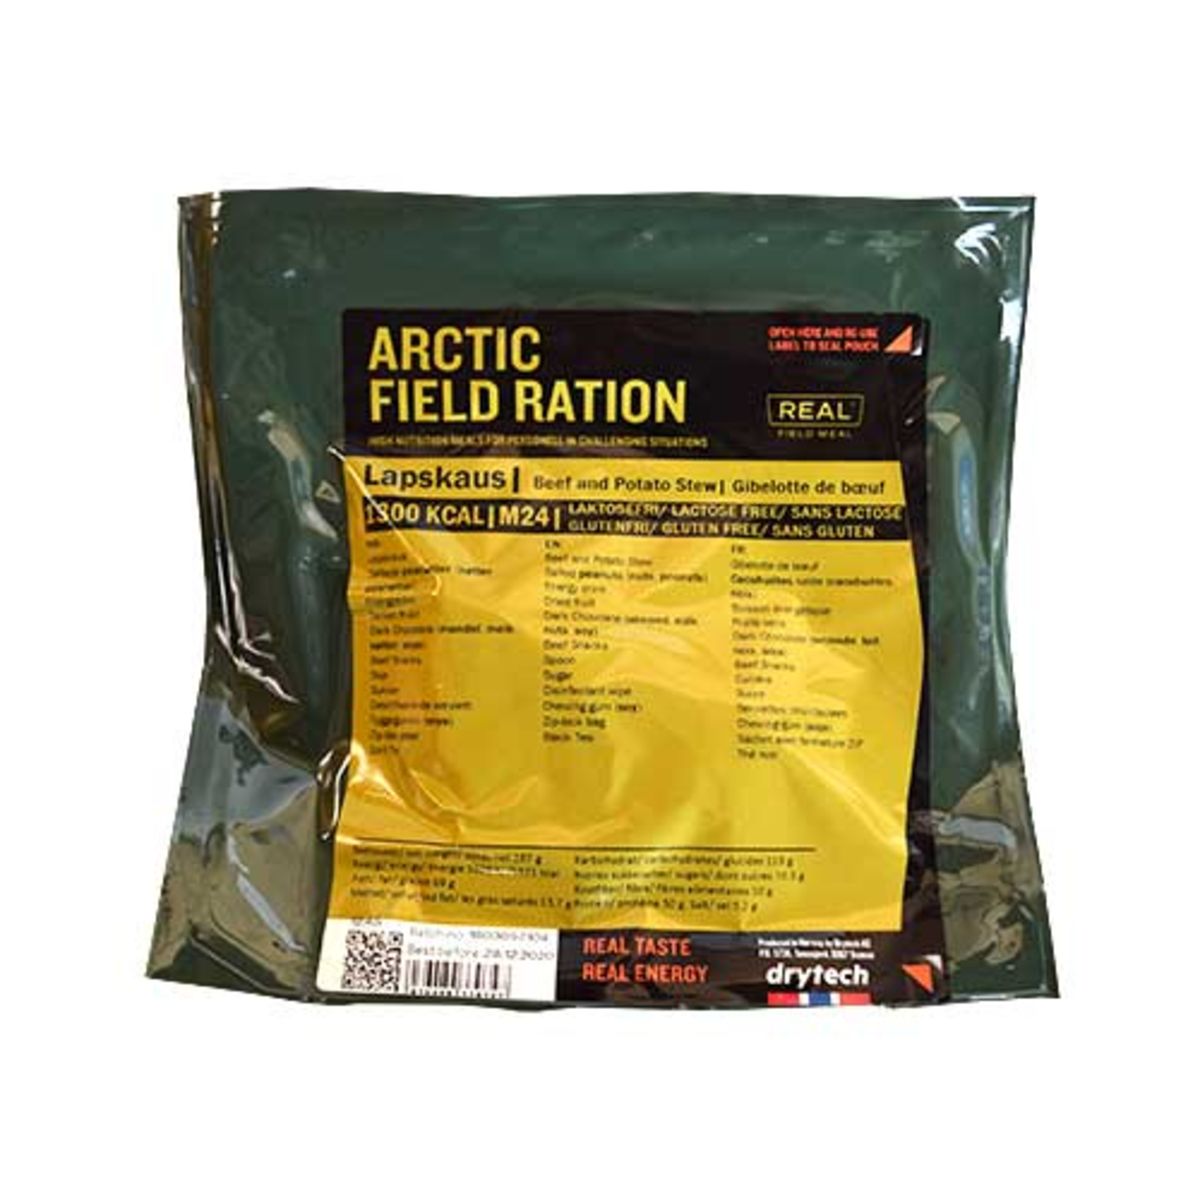 Freeze dried ration - Creamy pasta with pork - Arctic Field Ration